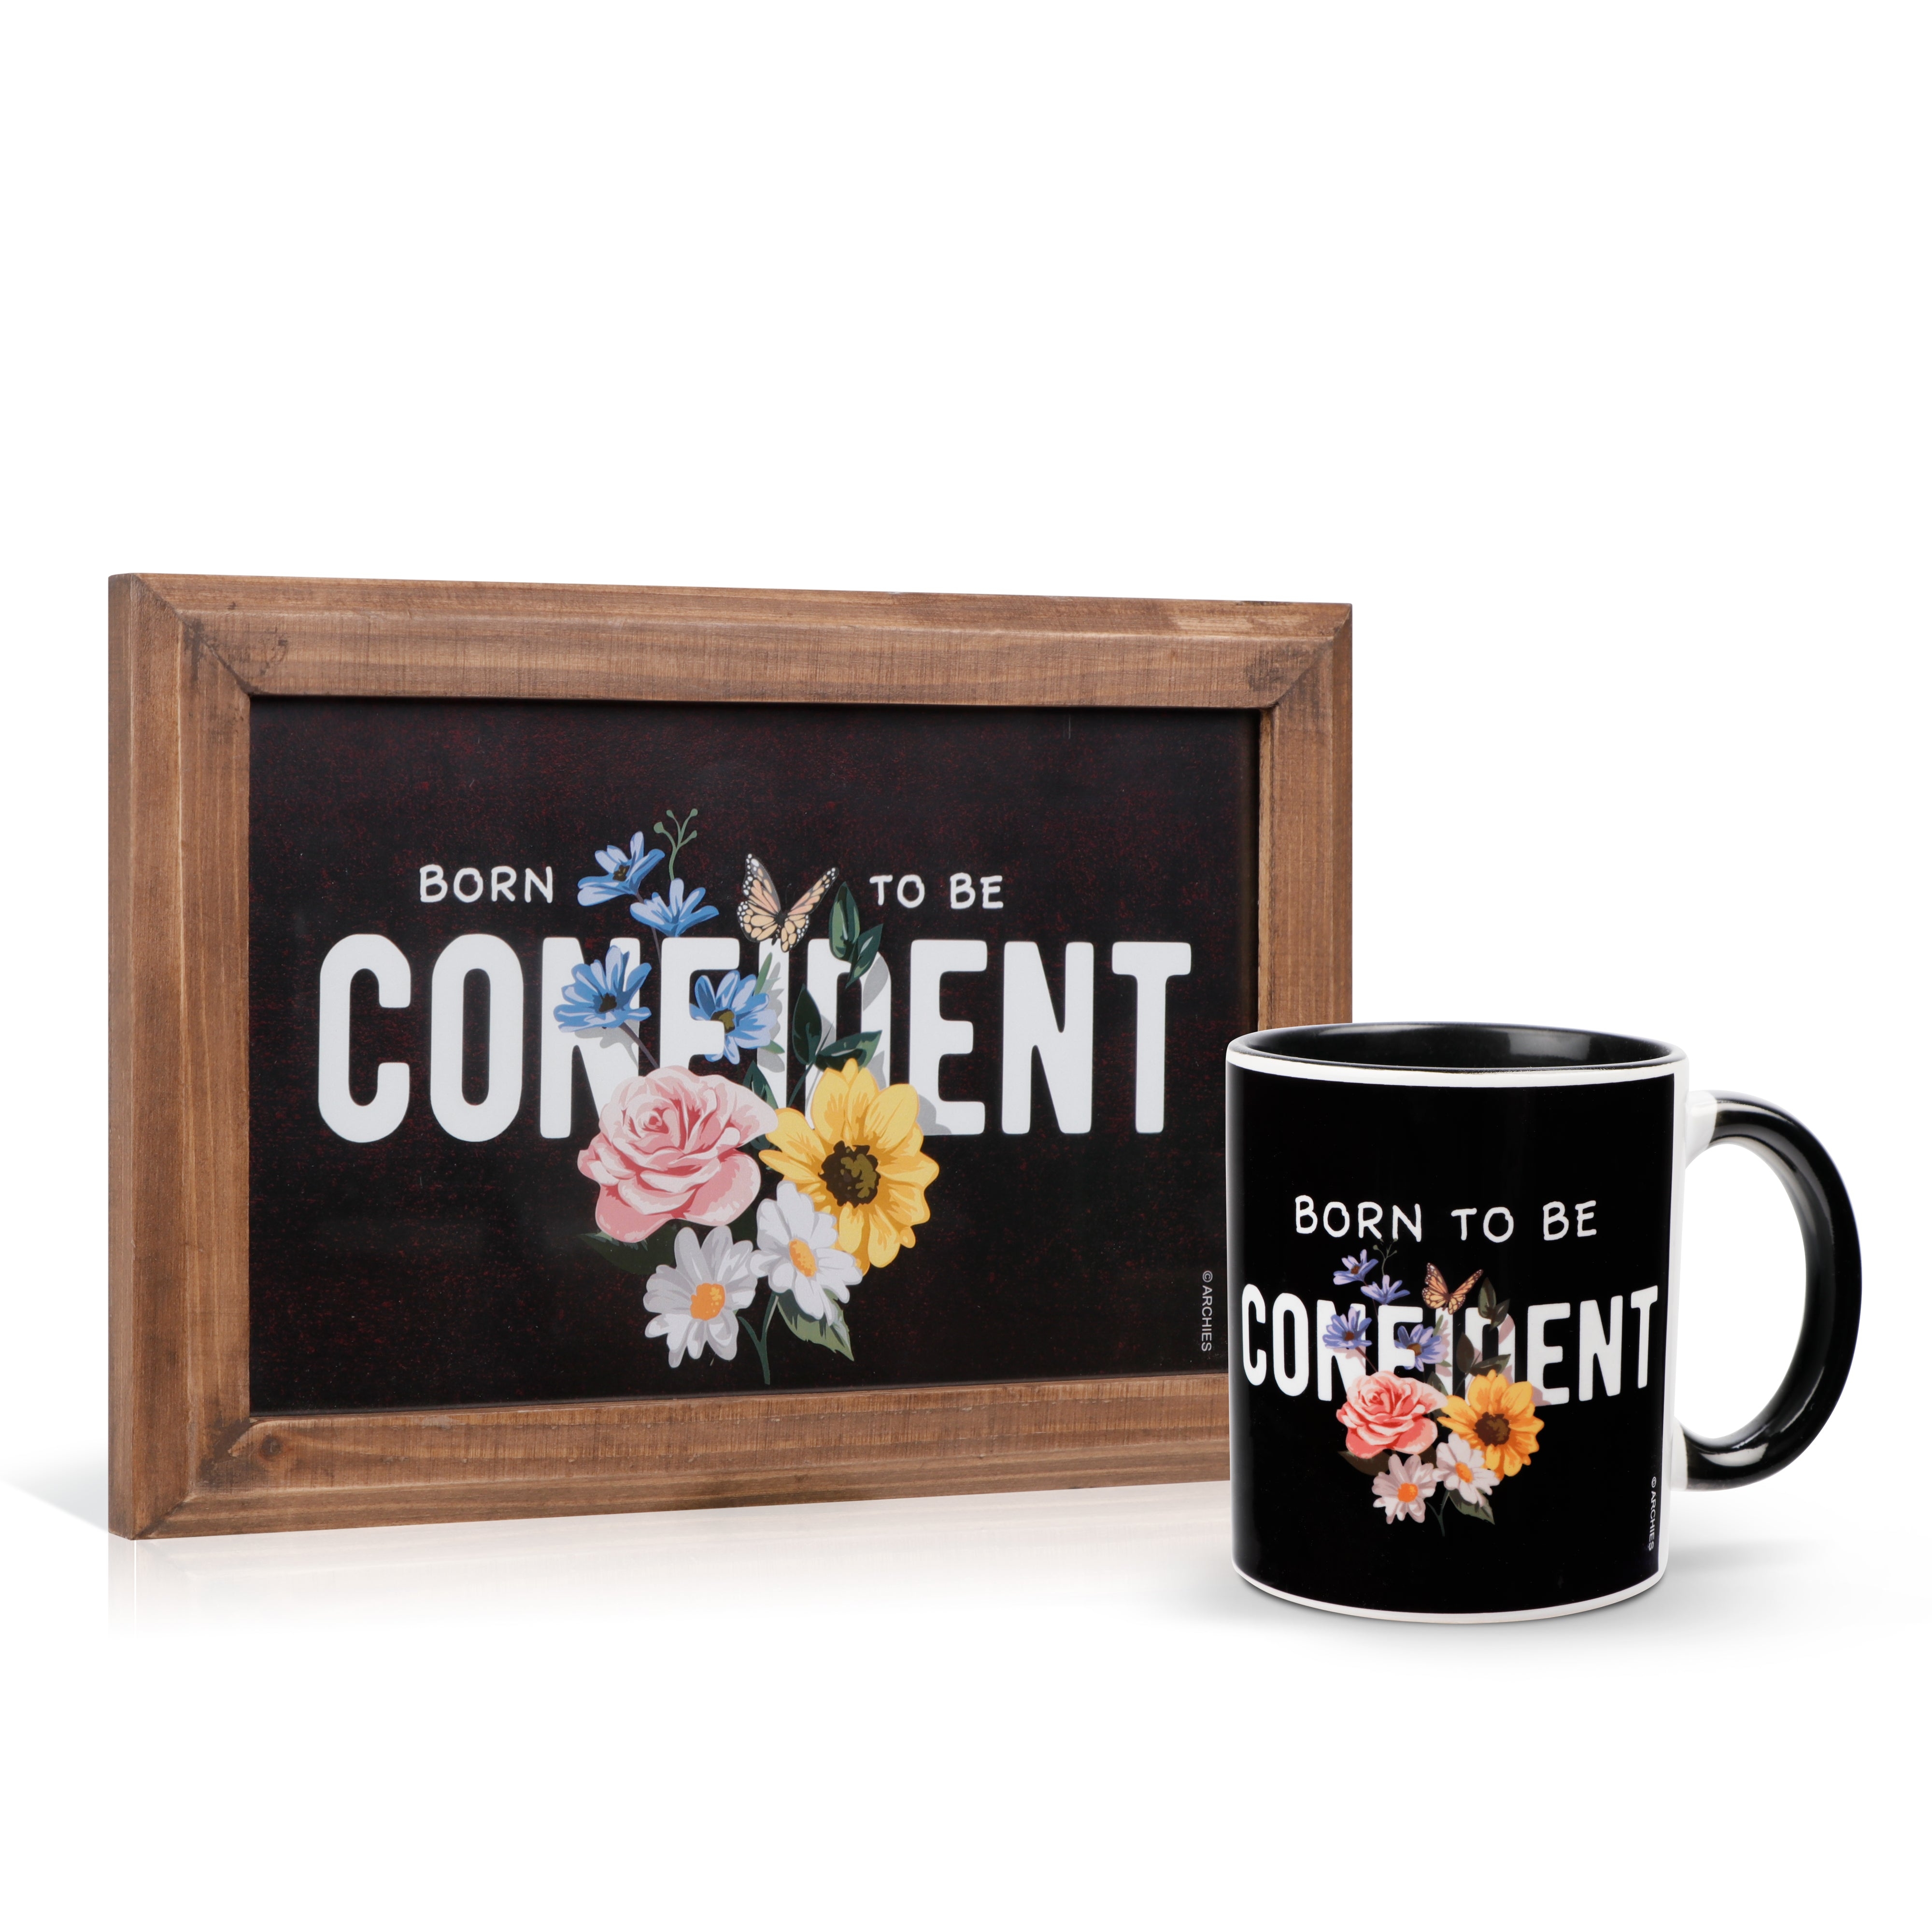 Archies KEEP SAKE Combo Gift with Ceramic Mug and Elevated Initial Quotatio- Born to be CONFIDENT